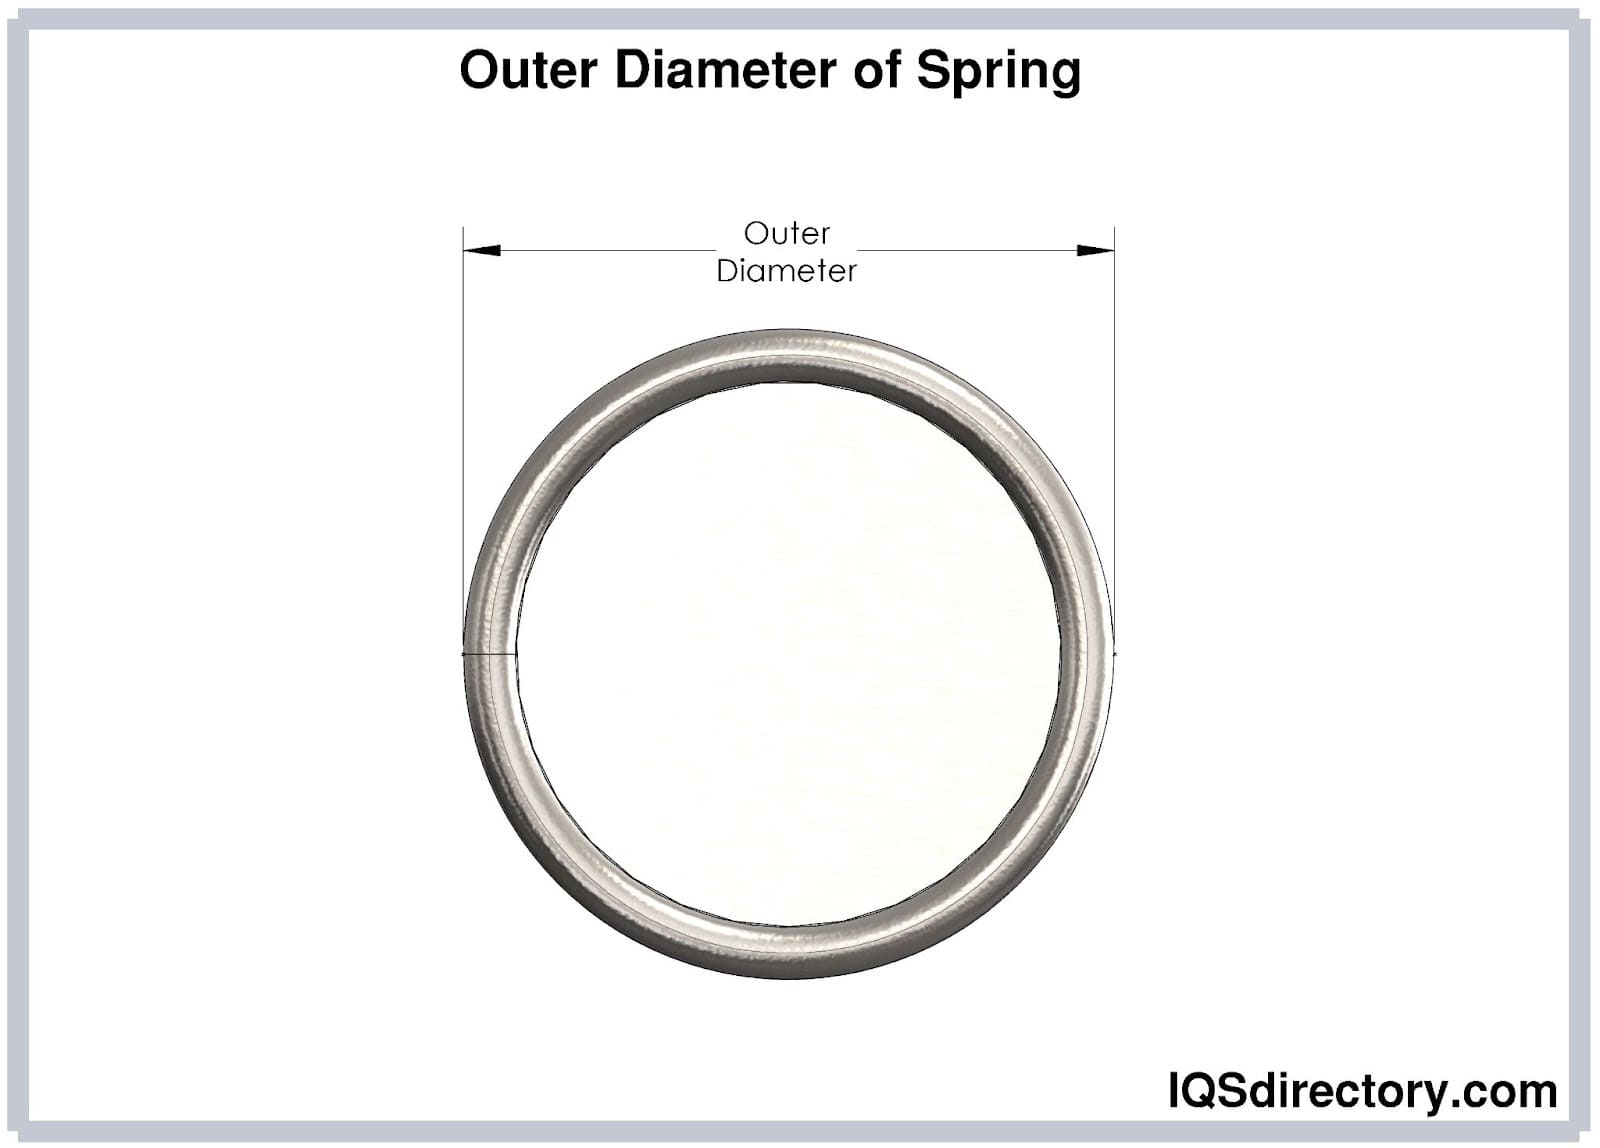 Outer Diameter of Spring